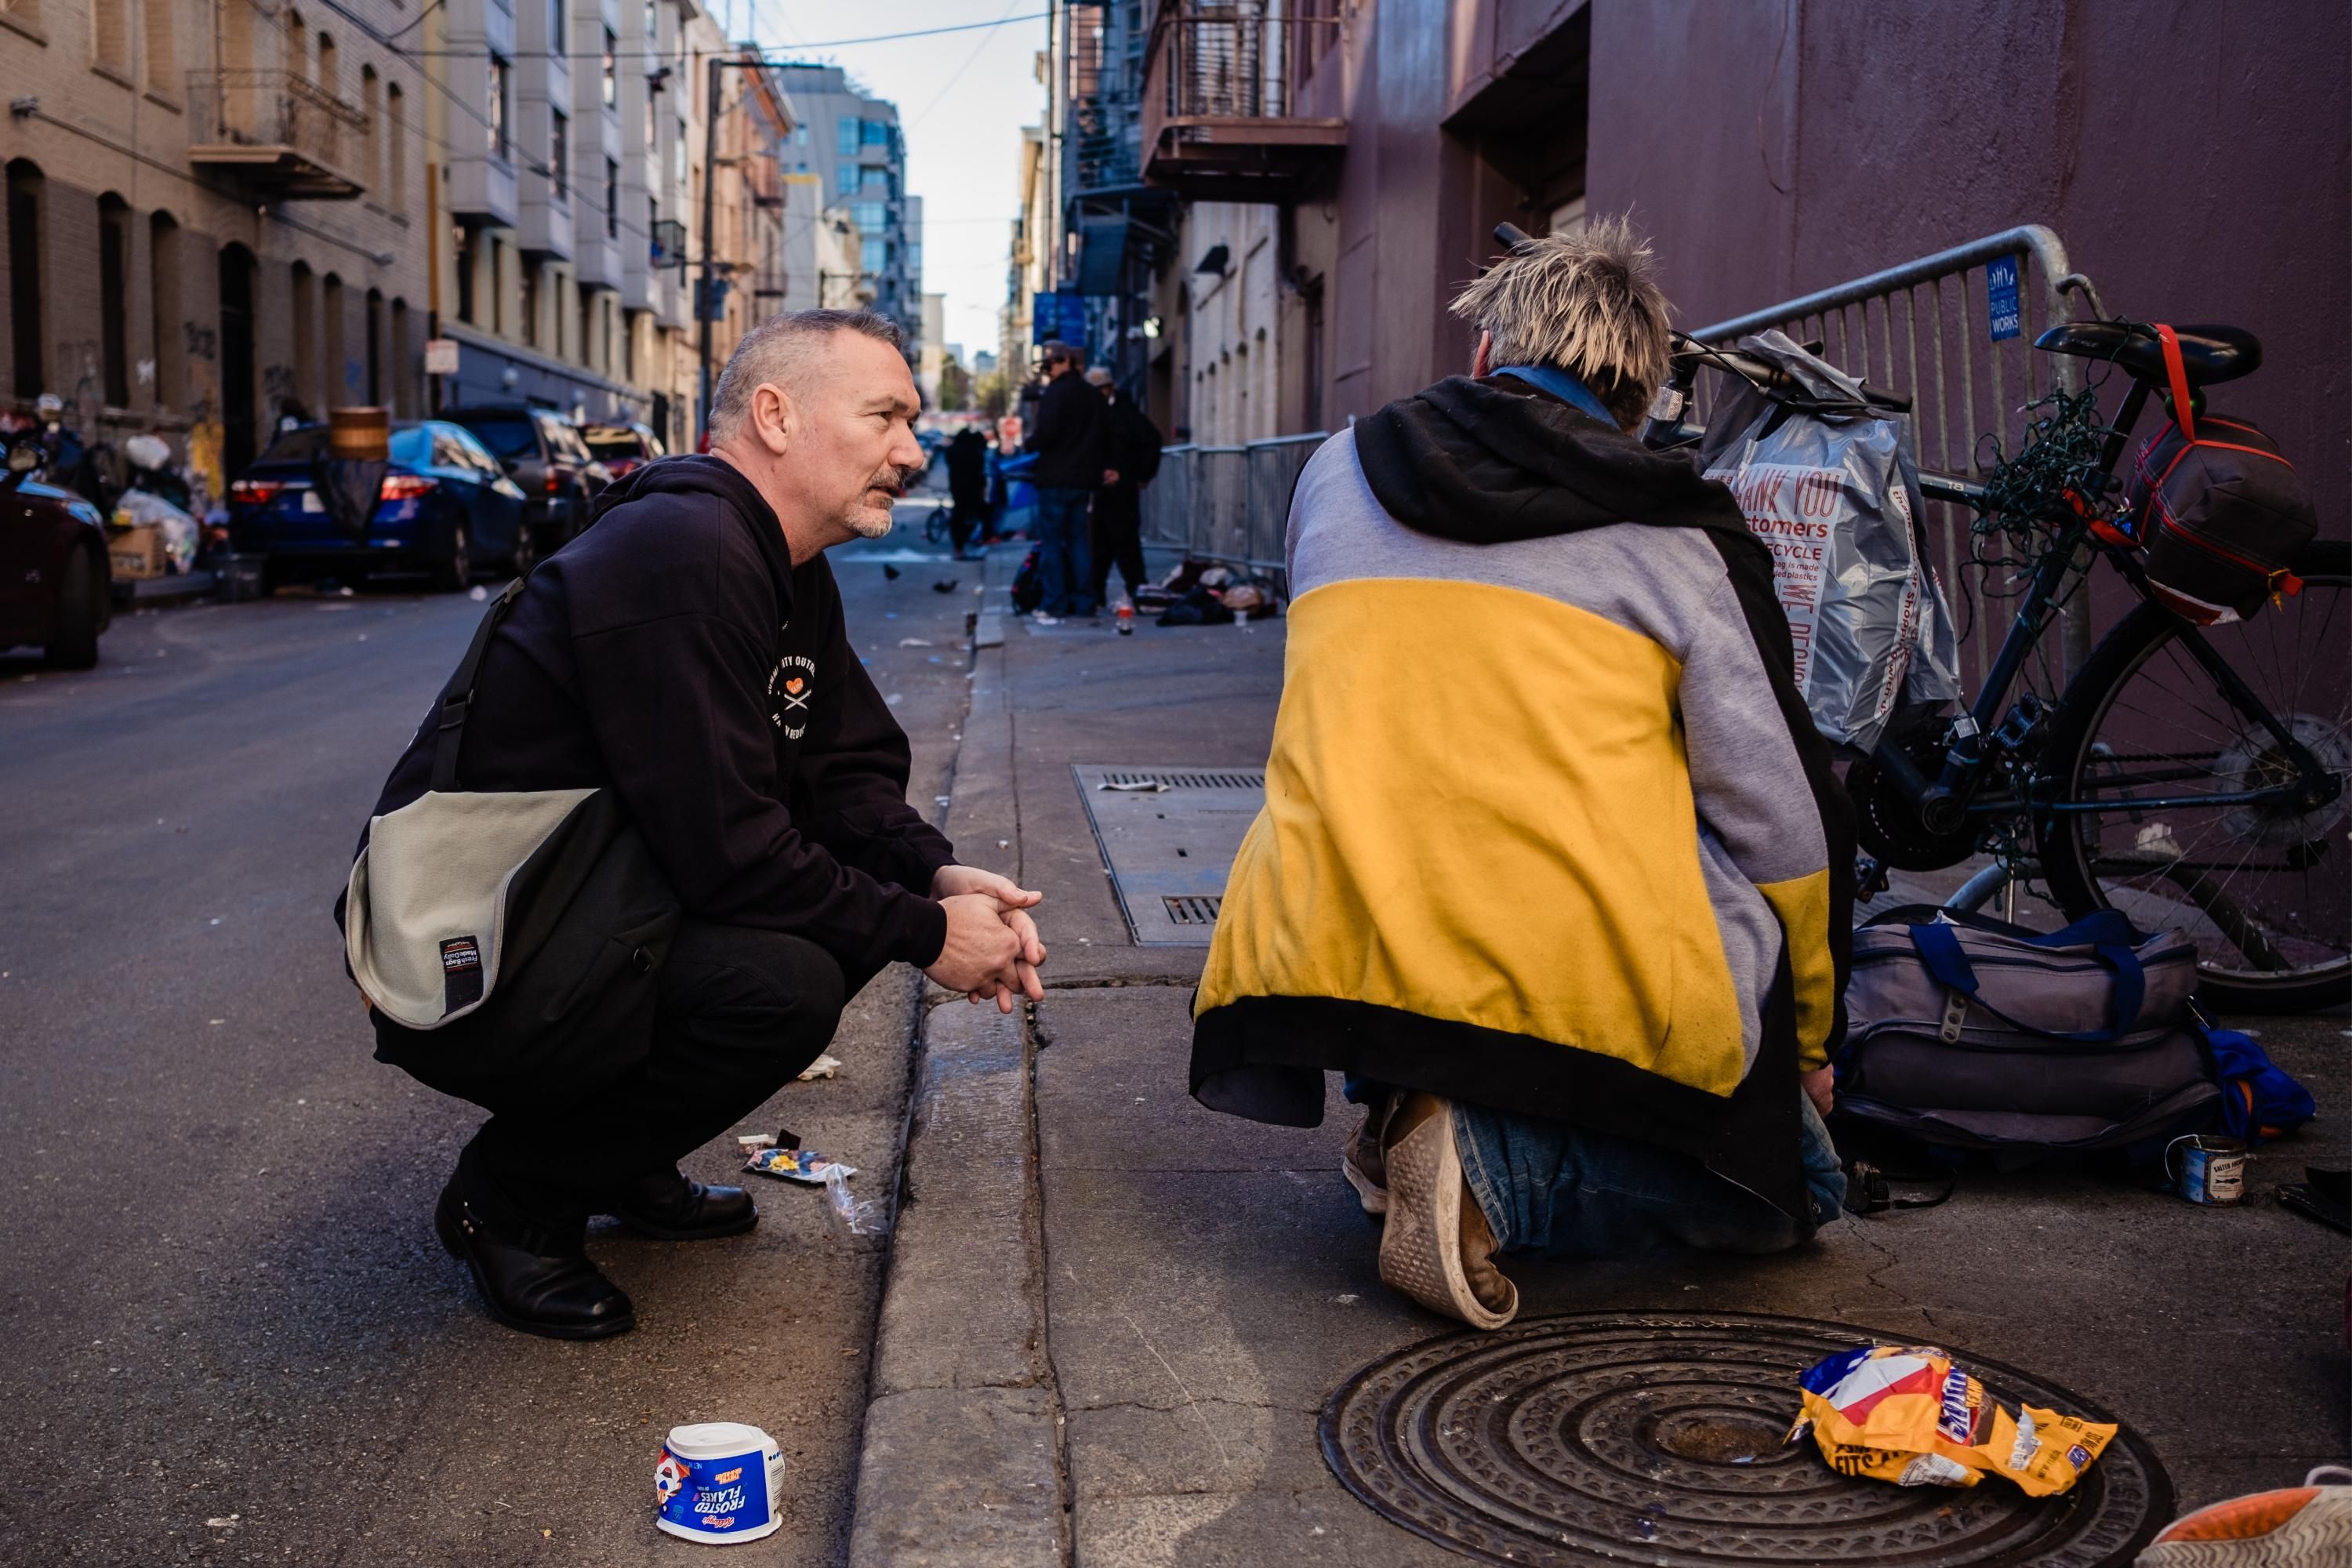 A harm reduction worker speaks to a person on the streets of San Francisco